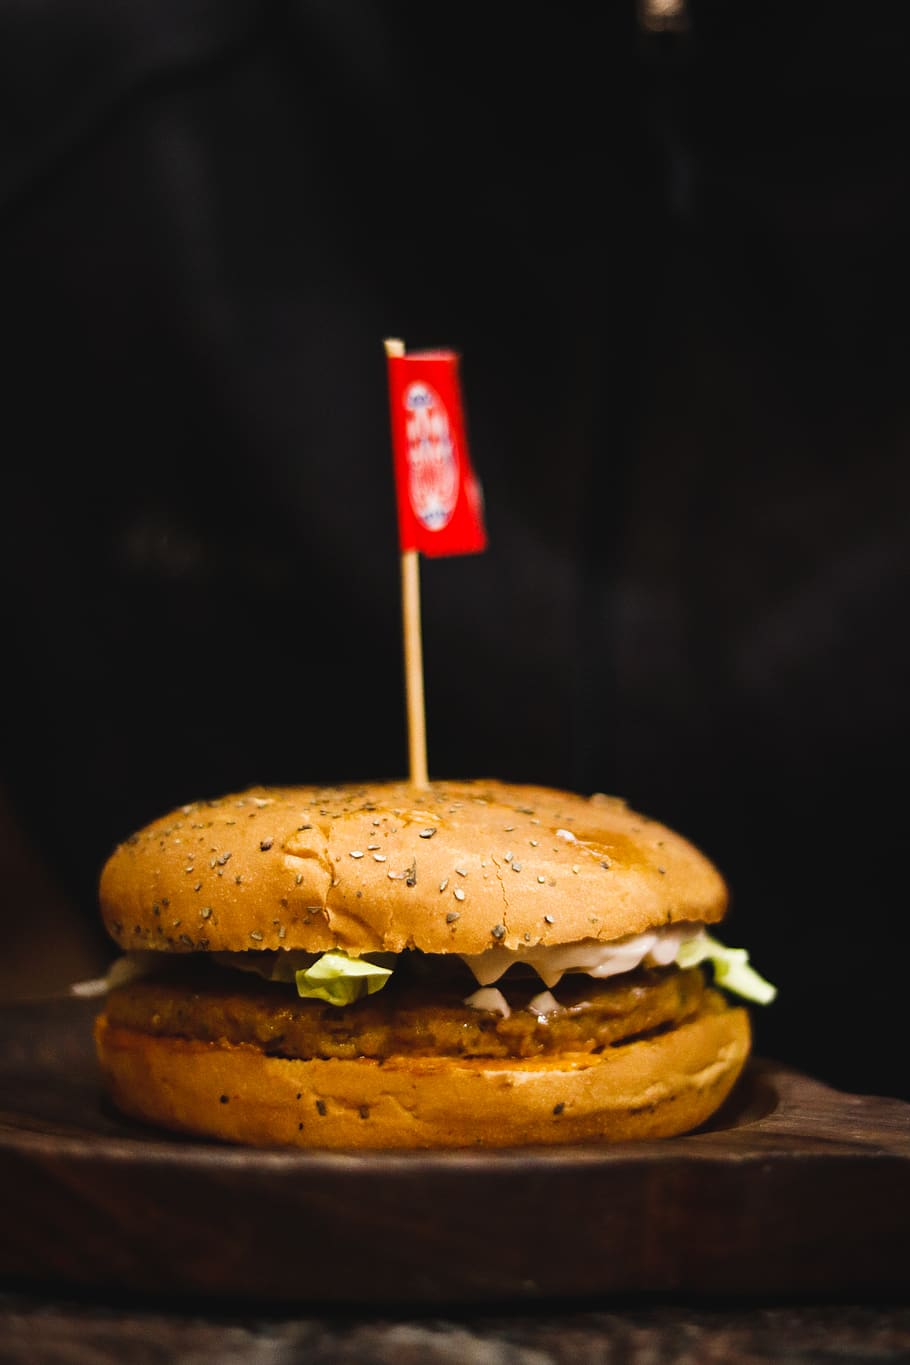 hamburger on wooden surface with small flag, food, bread, photography